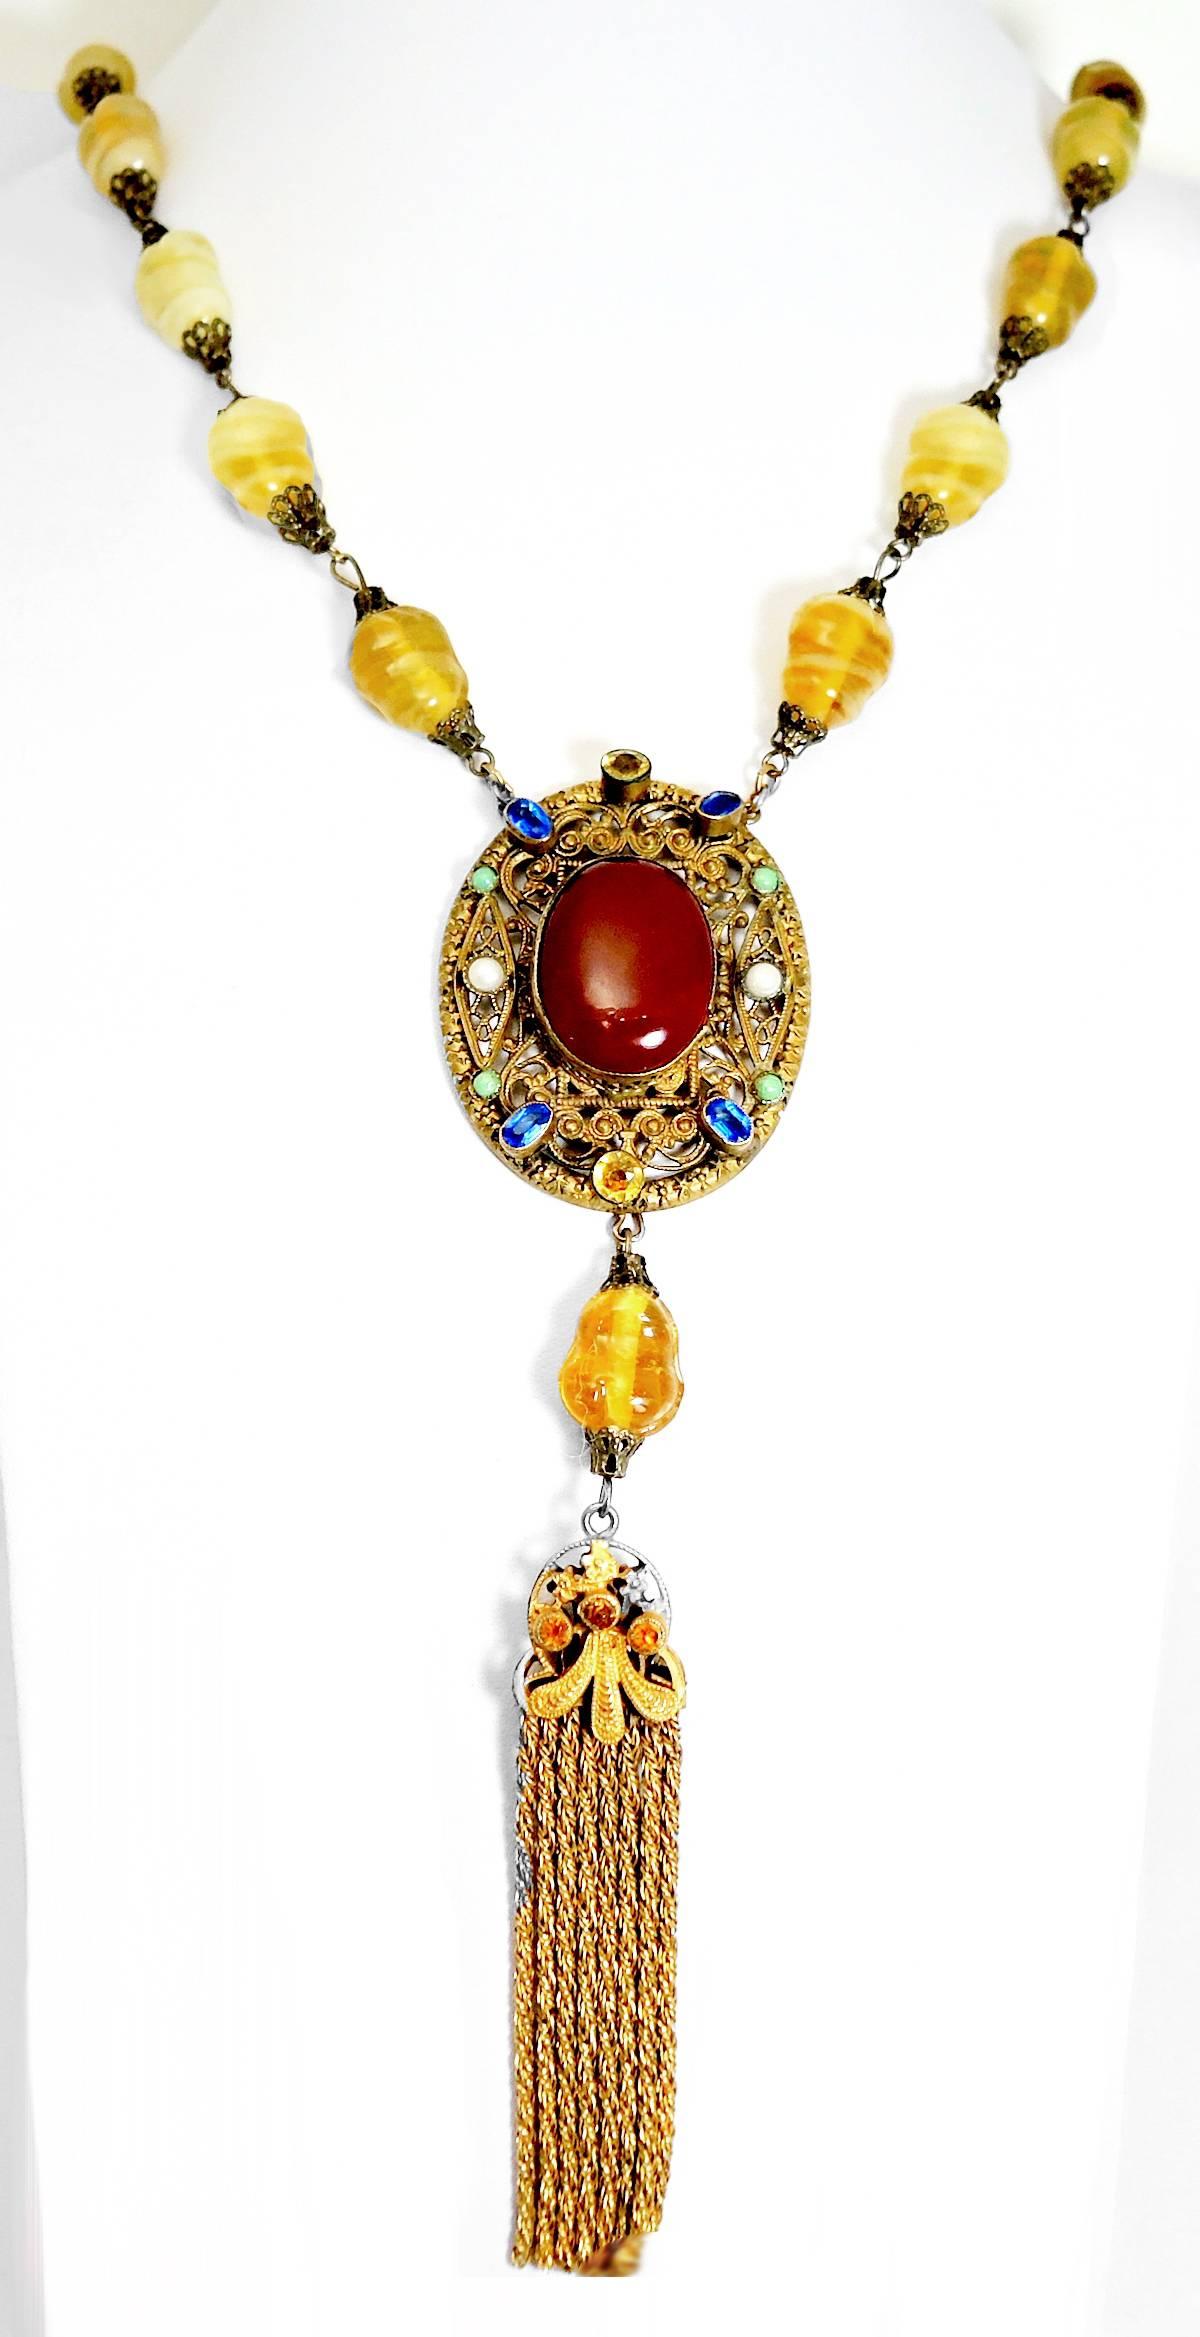 This 1930’s Czech necklace is made with yellow poured glass. Each piece is spaced with brass connectors. It leads to a beautiful centerpiece that has a round faux carnelian stone in the center. The pendant also has blue, green and white glass